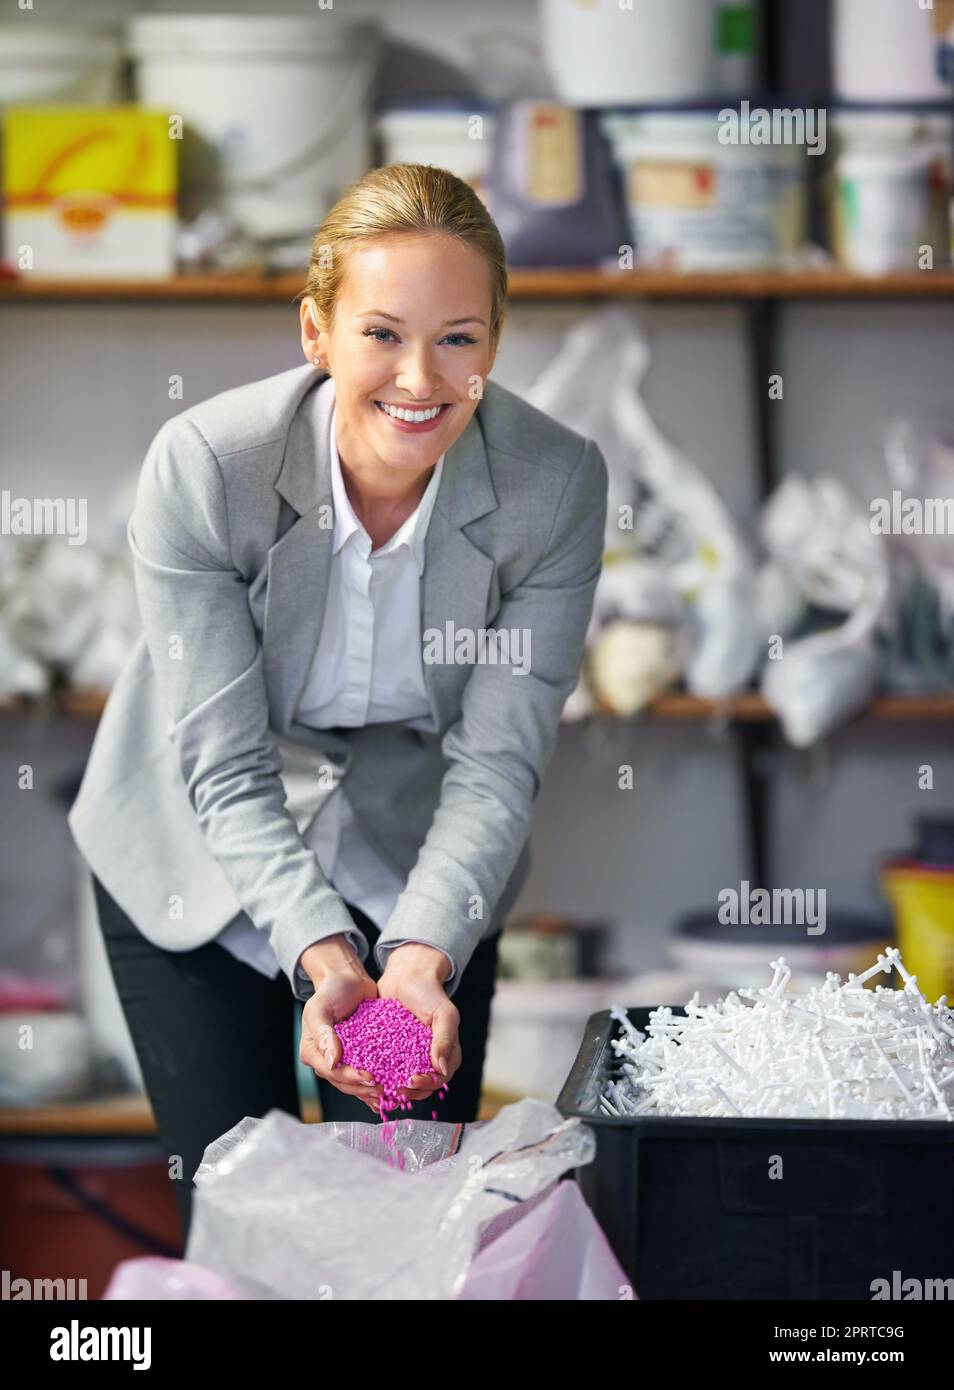 Perfect plastic. A plastics factory owner inspecting her merchandise. Stock Photo